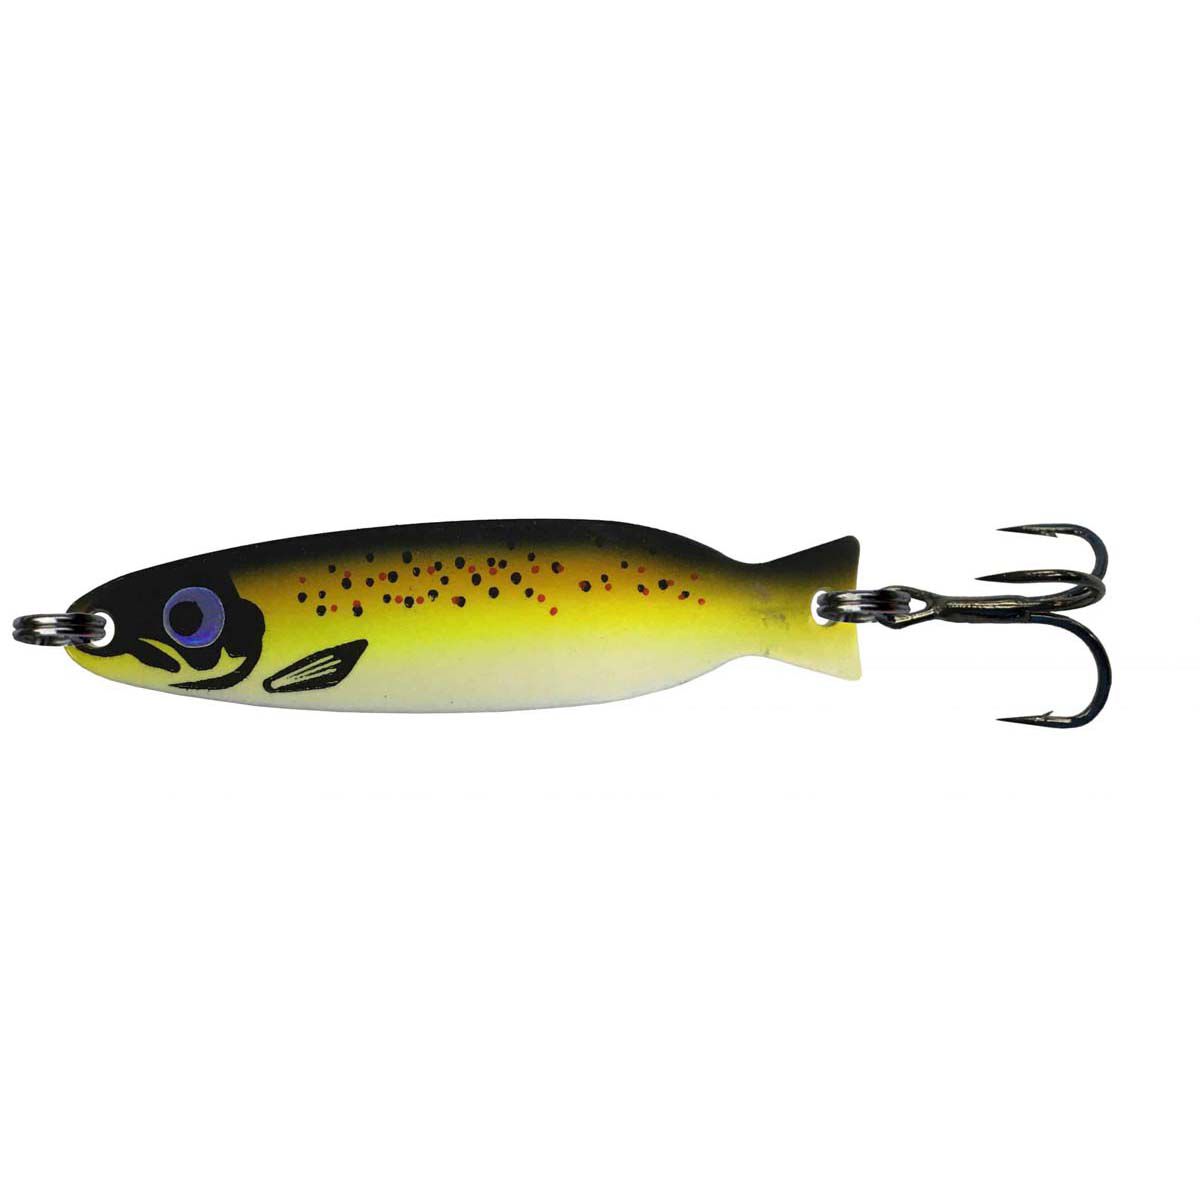 Spinners, Spoons and Fly Fishing Lures For Sale Online Australia